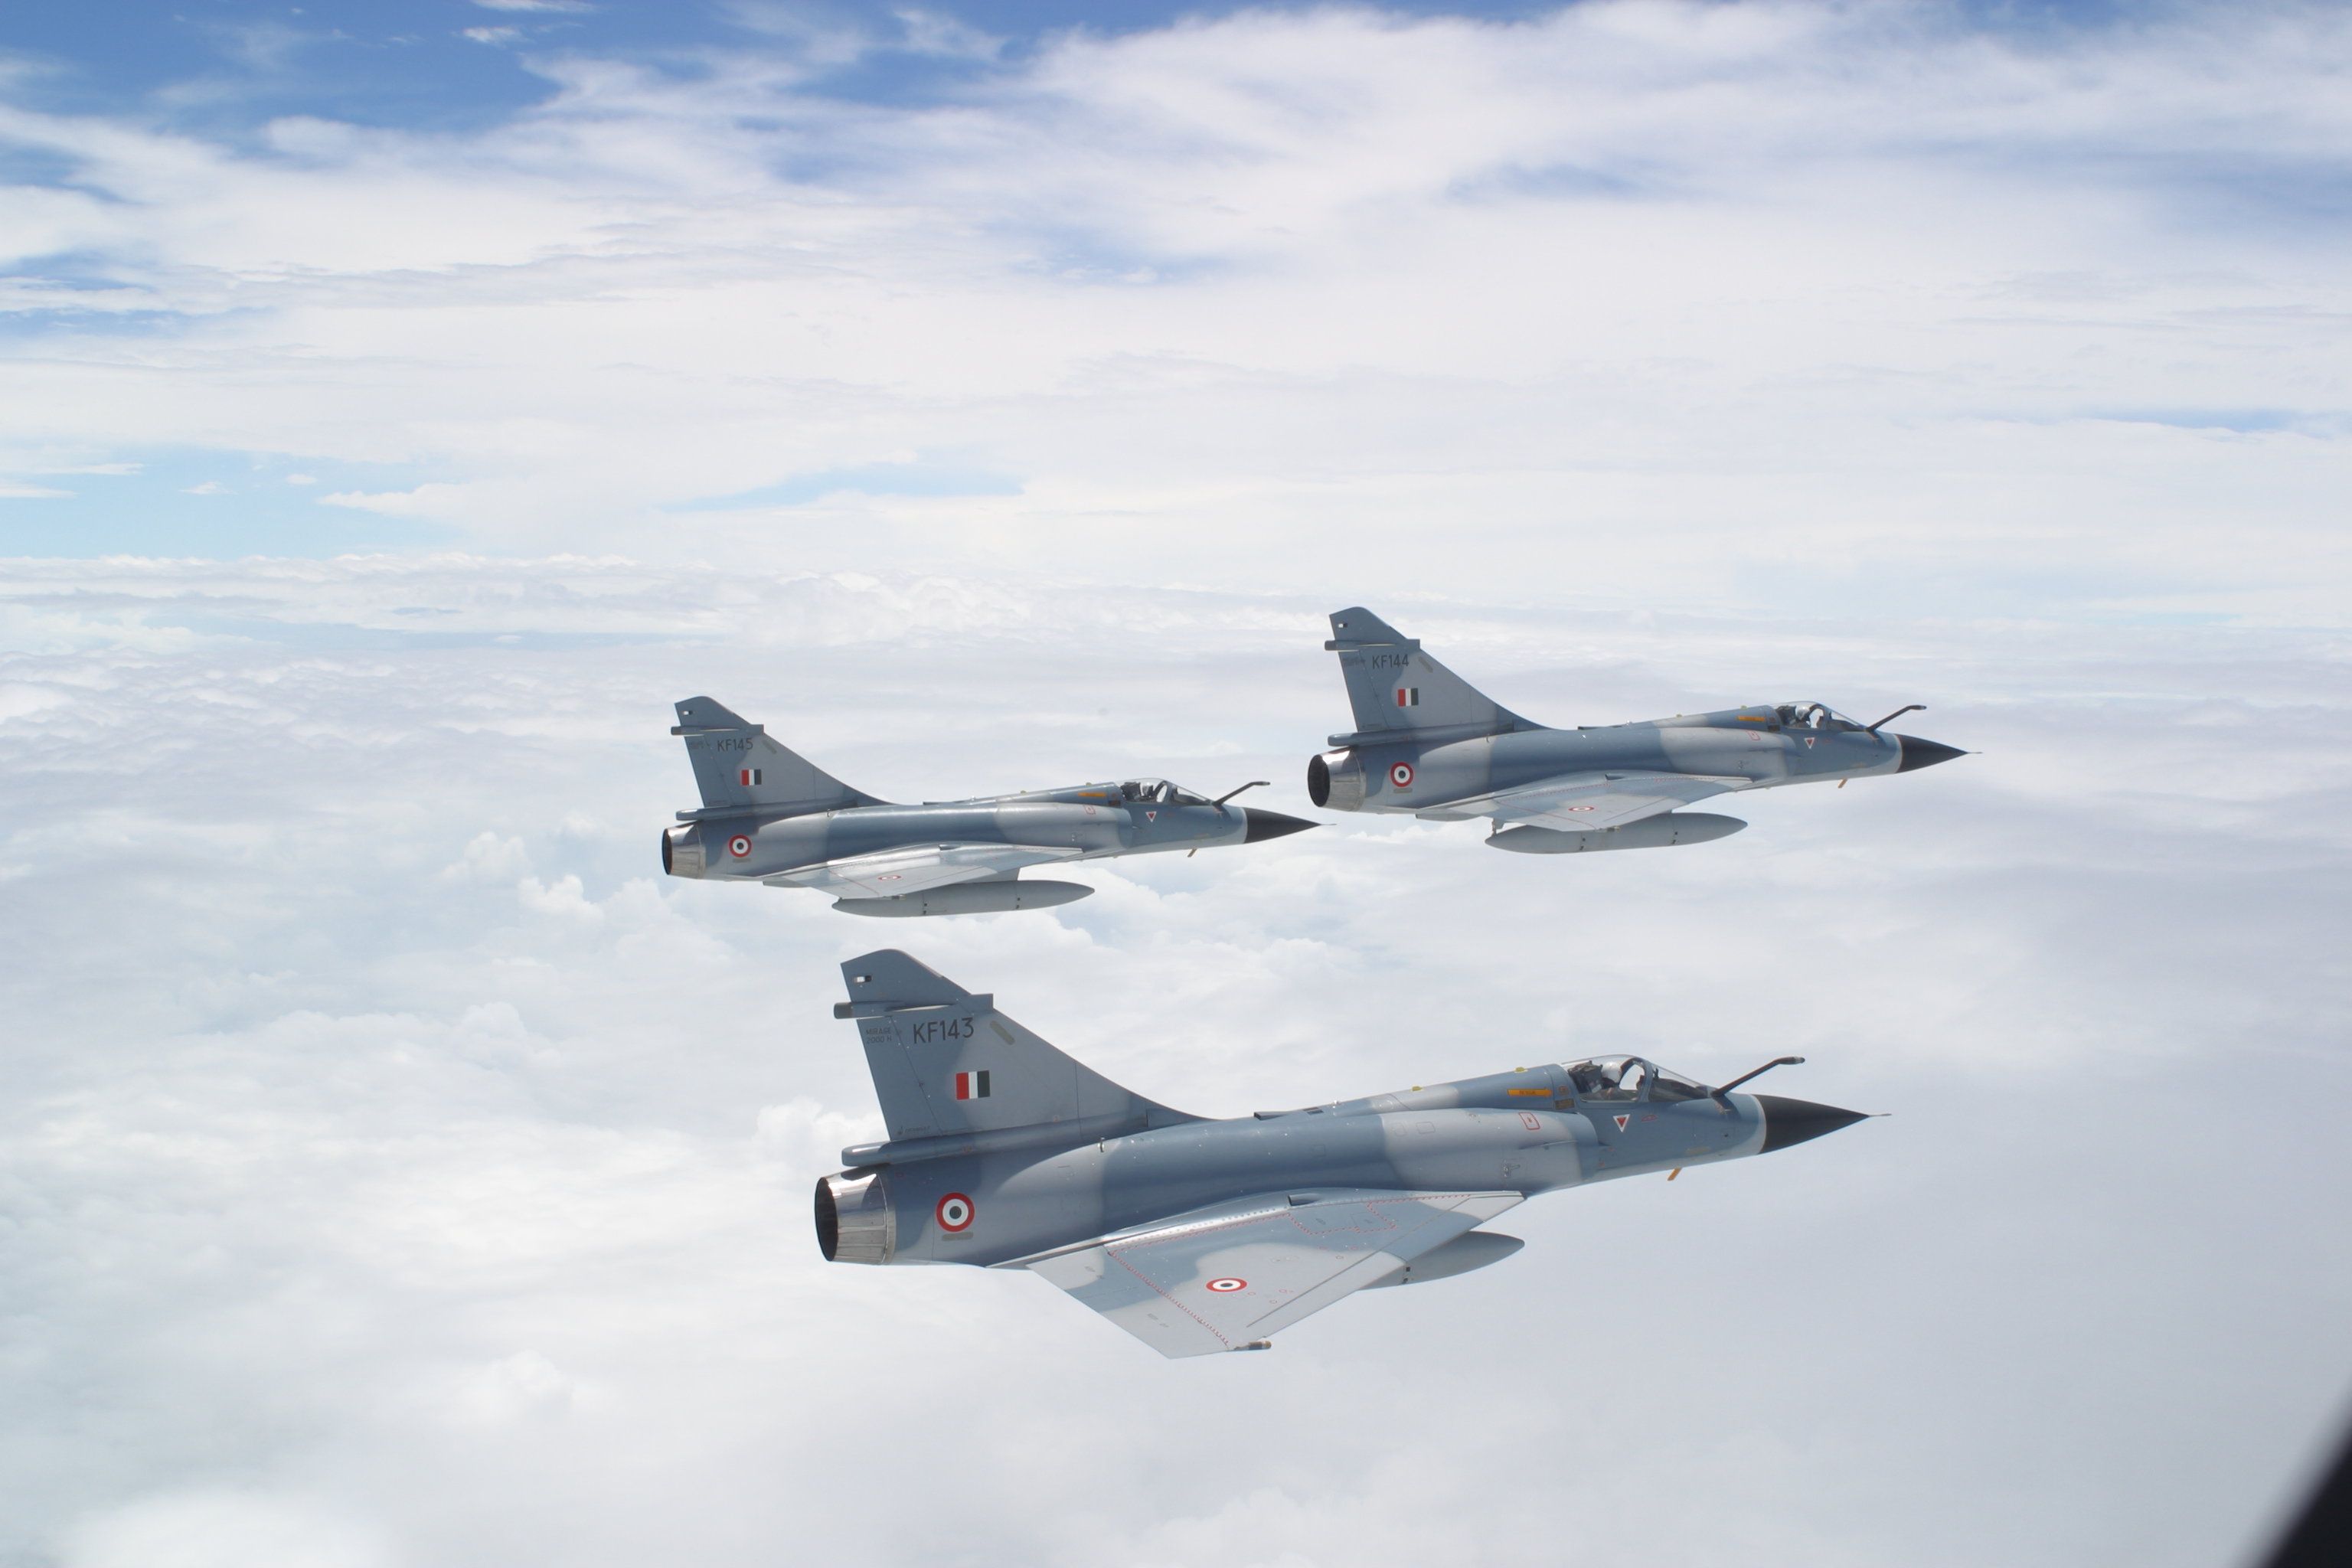 Mirage 2000 Formation - Mirage 2000 , HD Wallpaper & Backgrounds